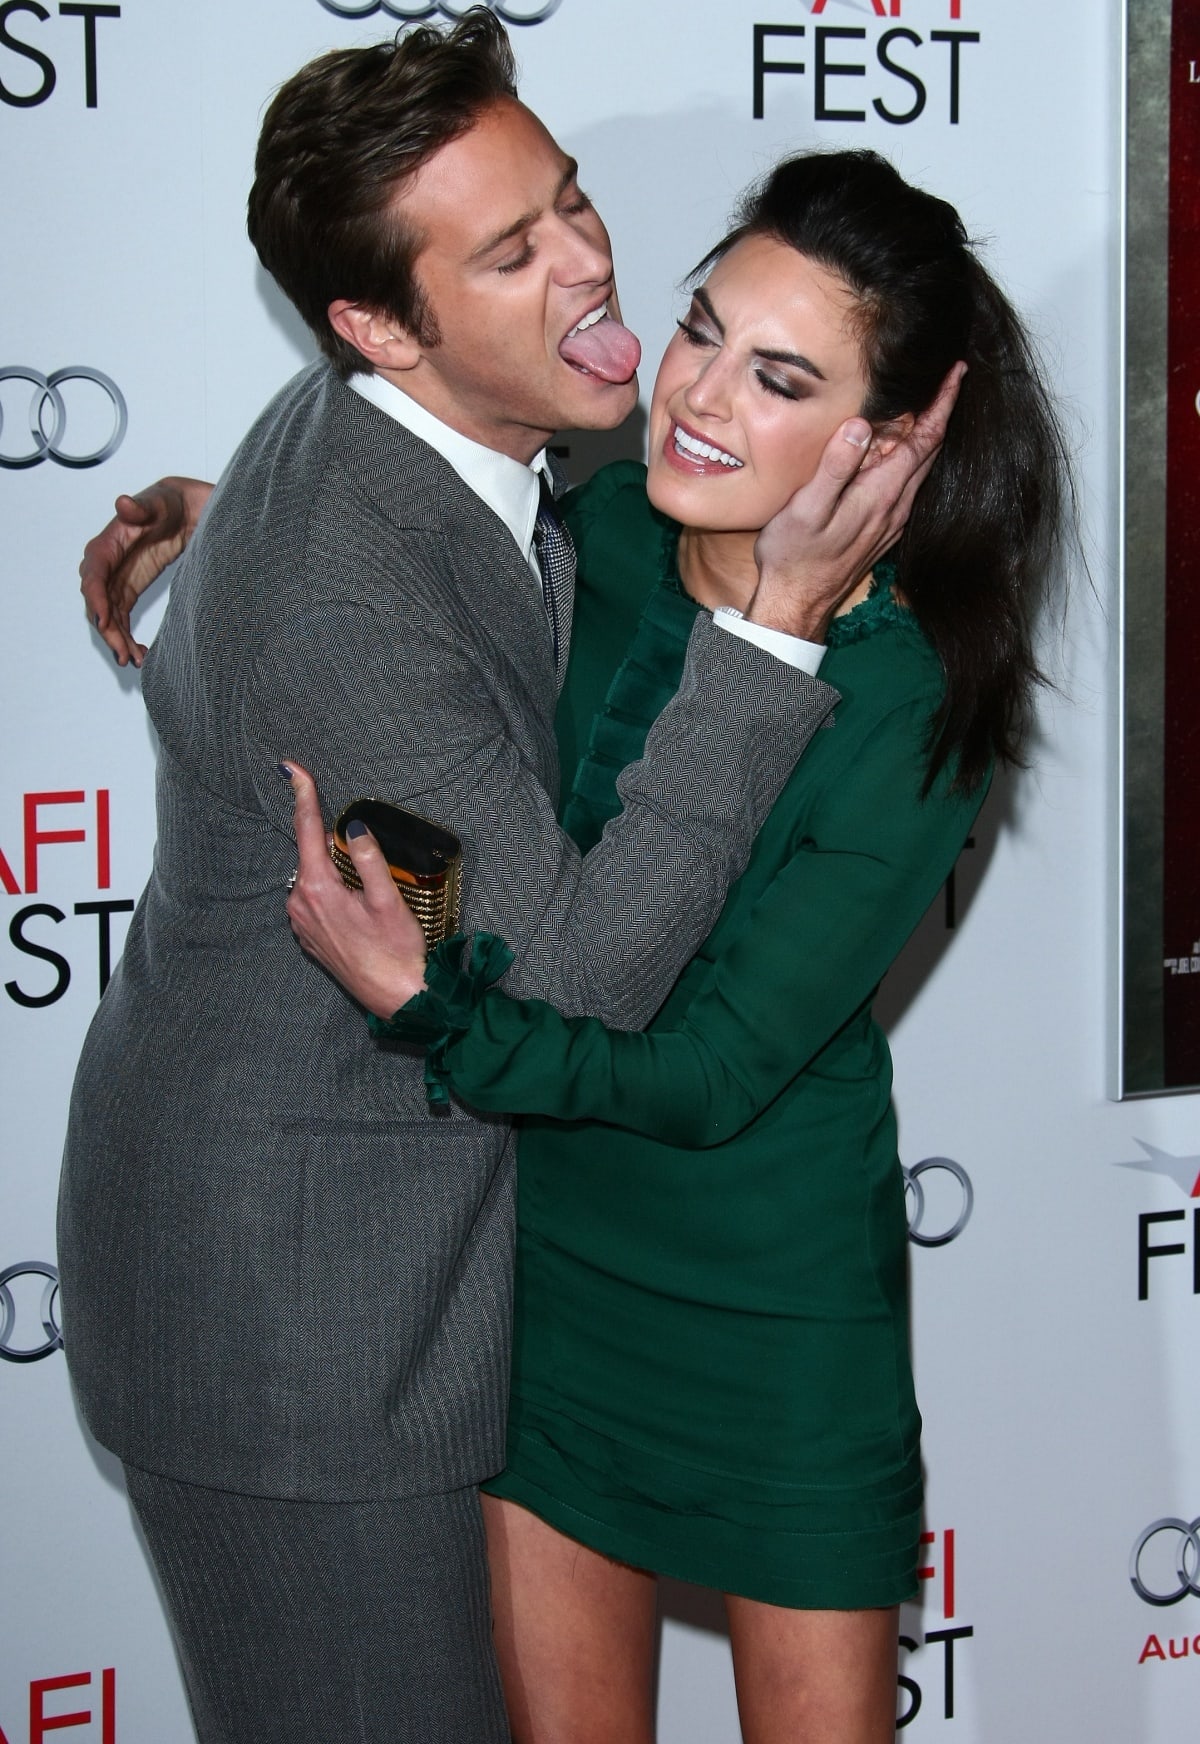 Armie Hammer with then-wife Elizabeth Chambers at the J. Edgar opening night gala during the AFI Fest 2011